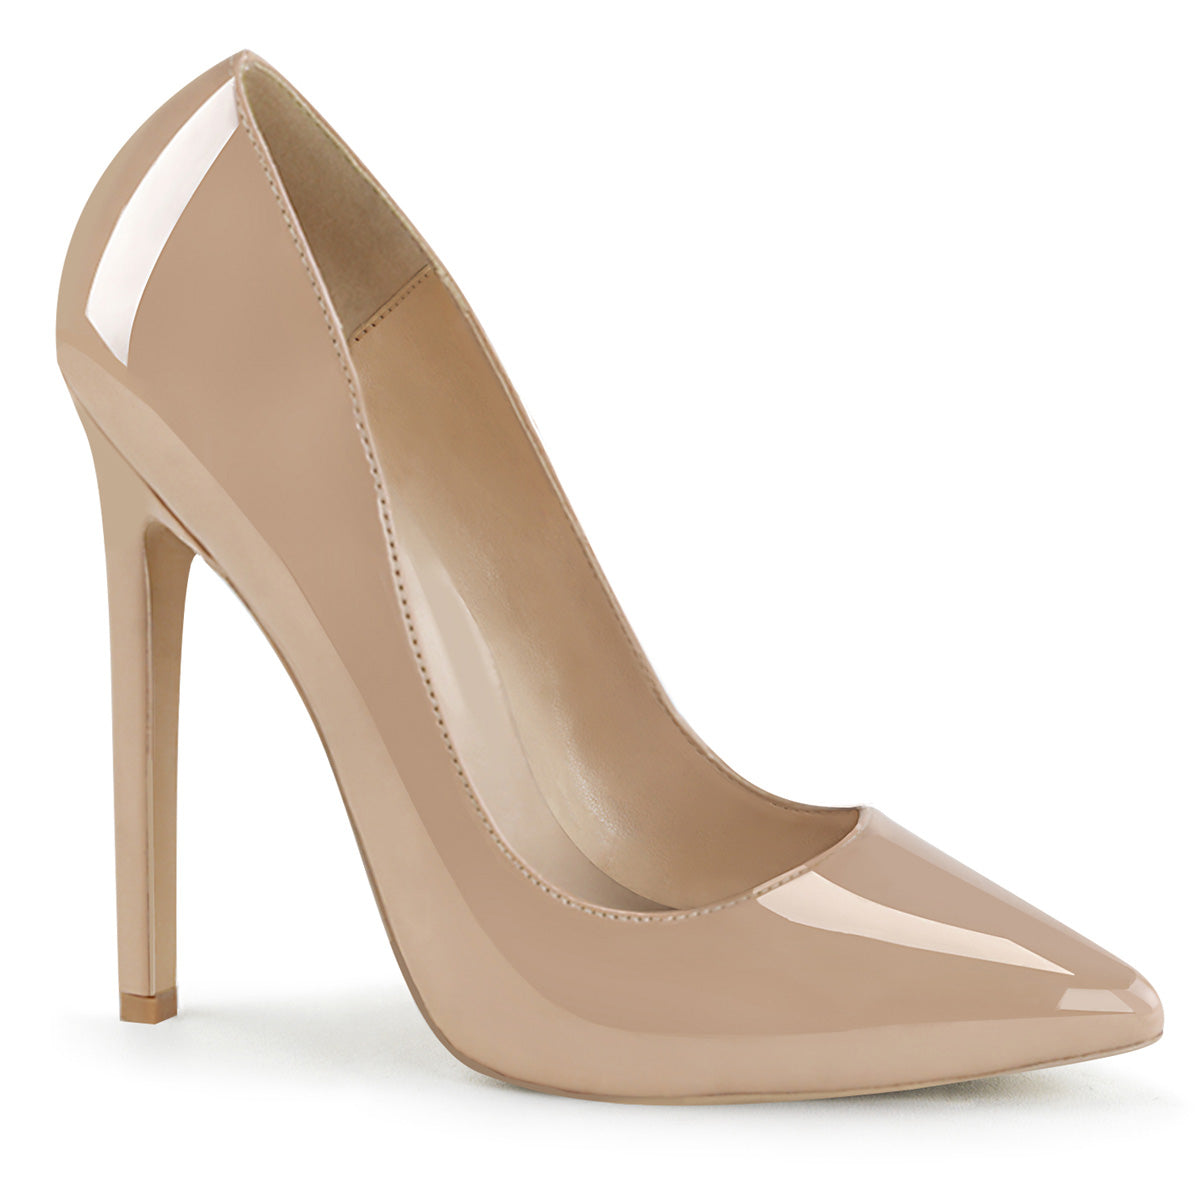 SEXY-20 Pleaser Shoe 5 Inch Heel Nude Patent Fetish Footwear-Pleaser- Sexy Shoes